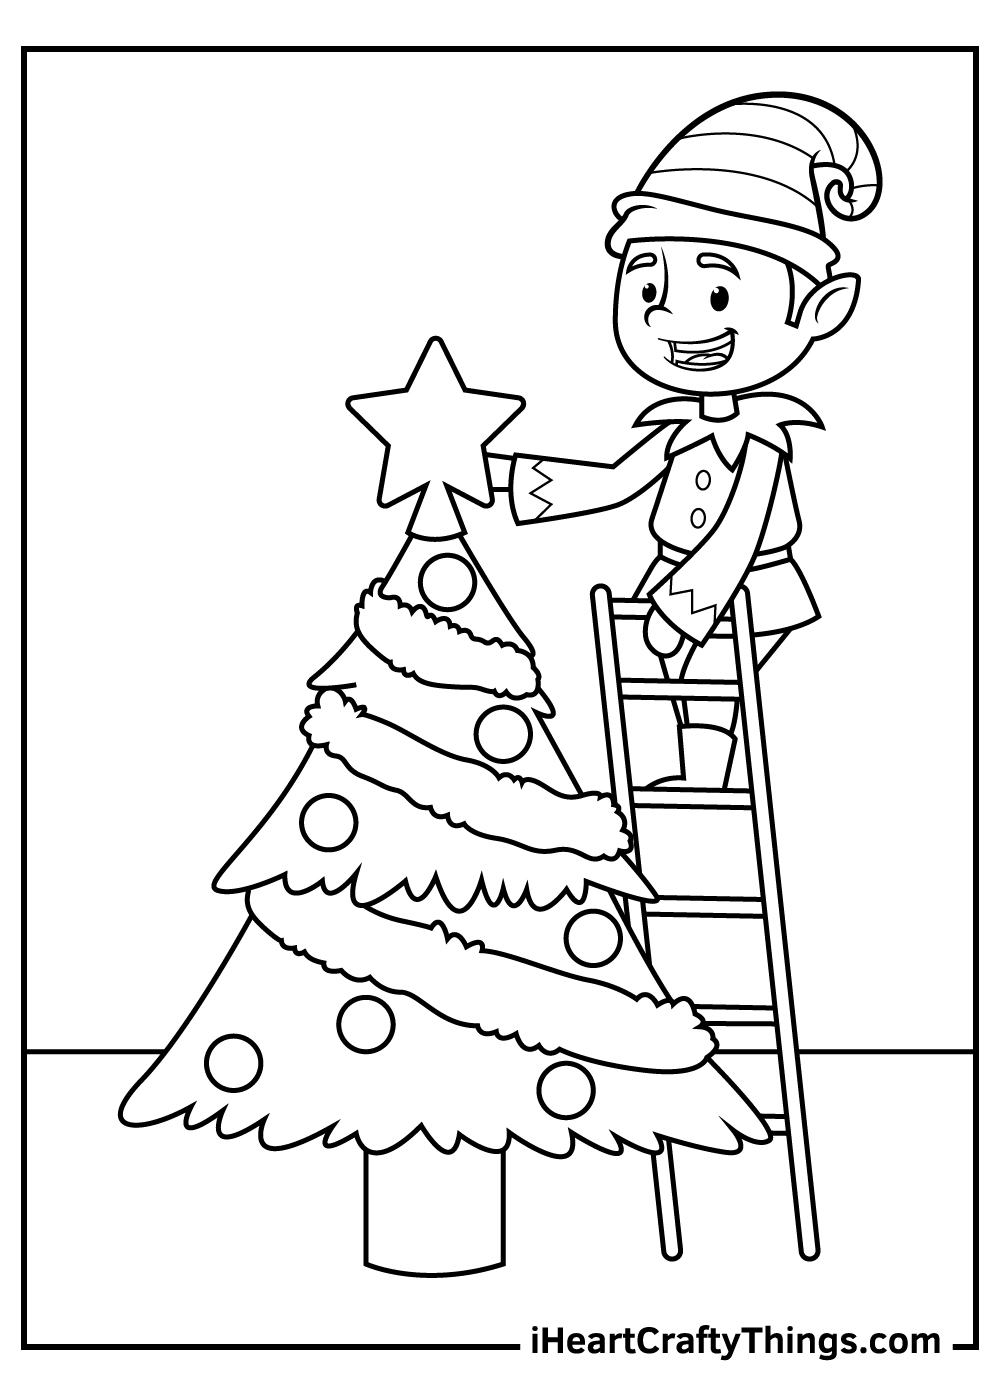 Christmas elves coloring pages free printables